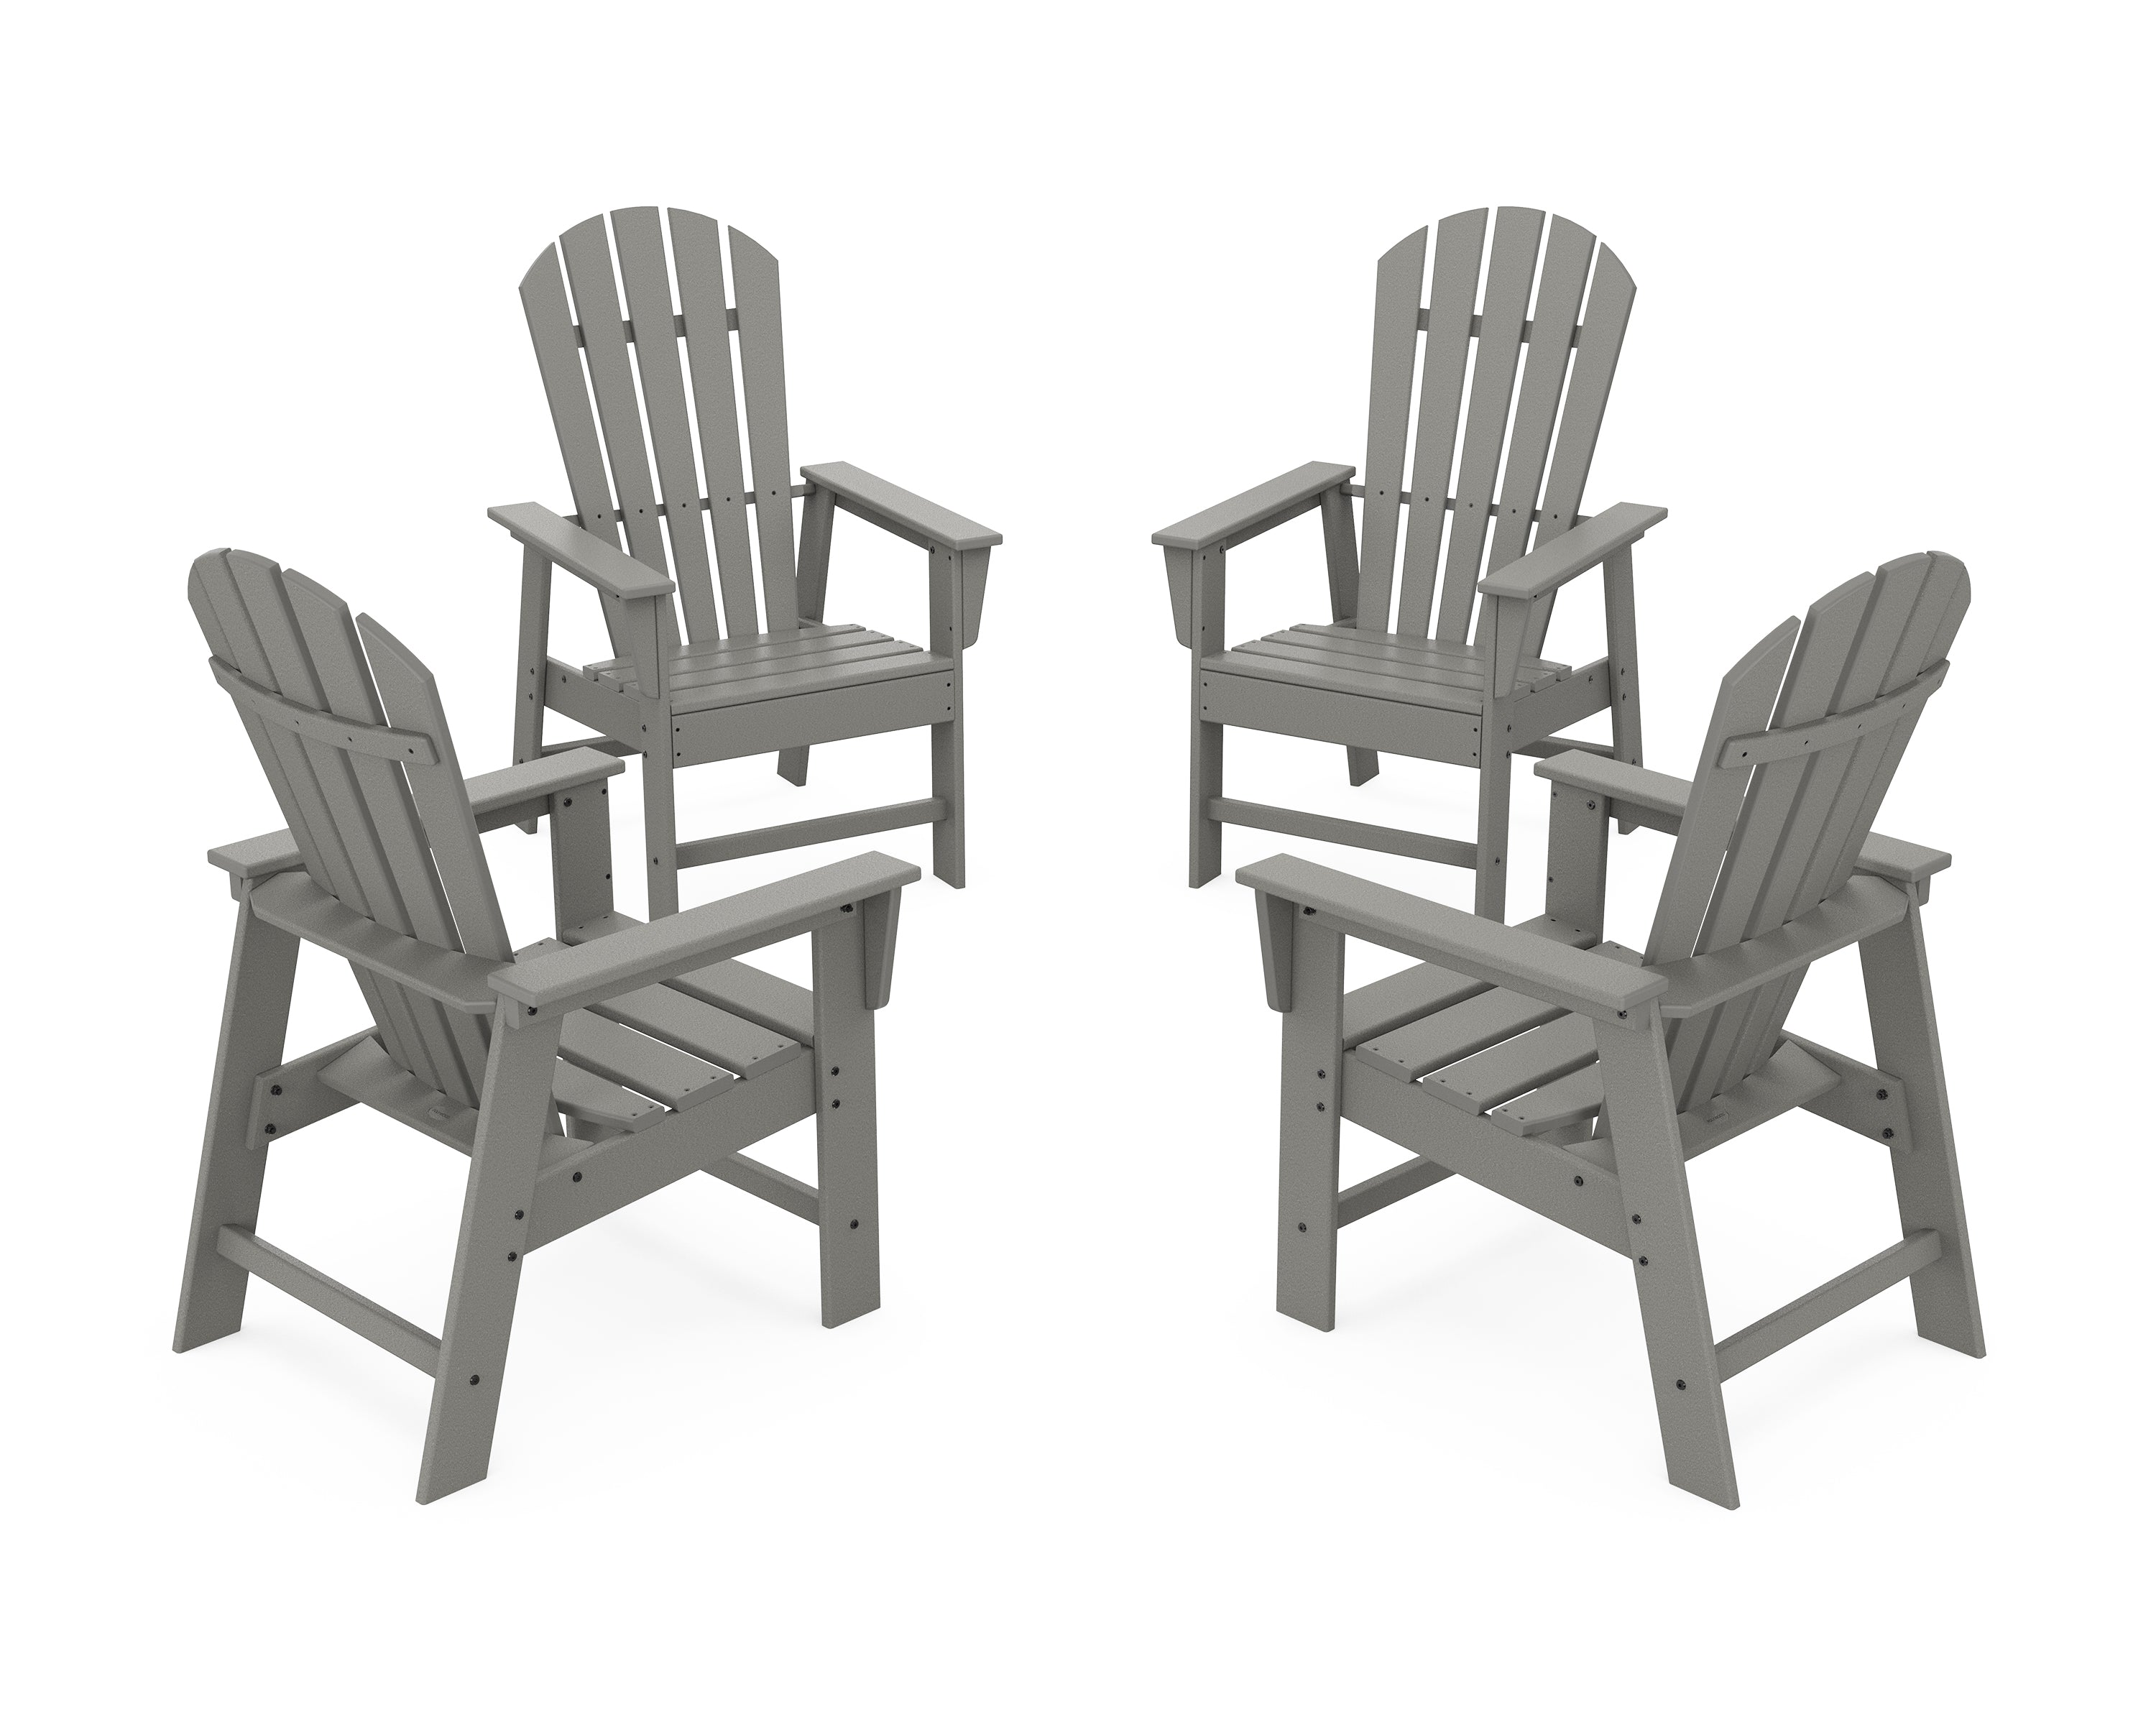 POLYWOOD® 4-Piece South Beach Casual Chair Conversation Set in Slate Grey